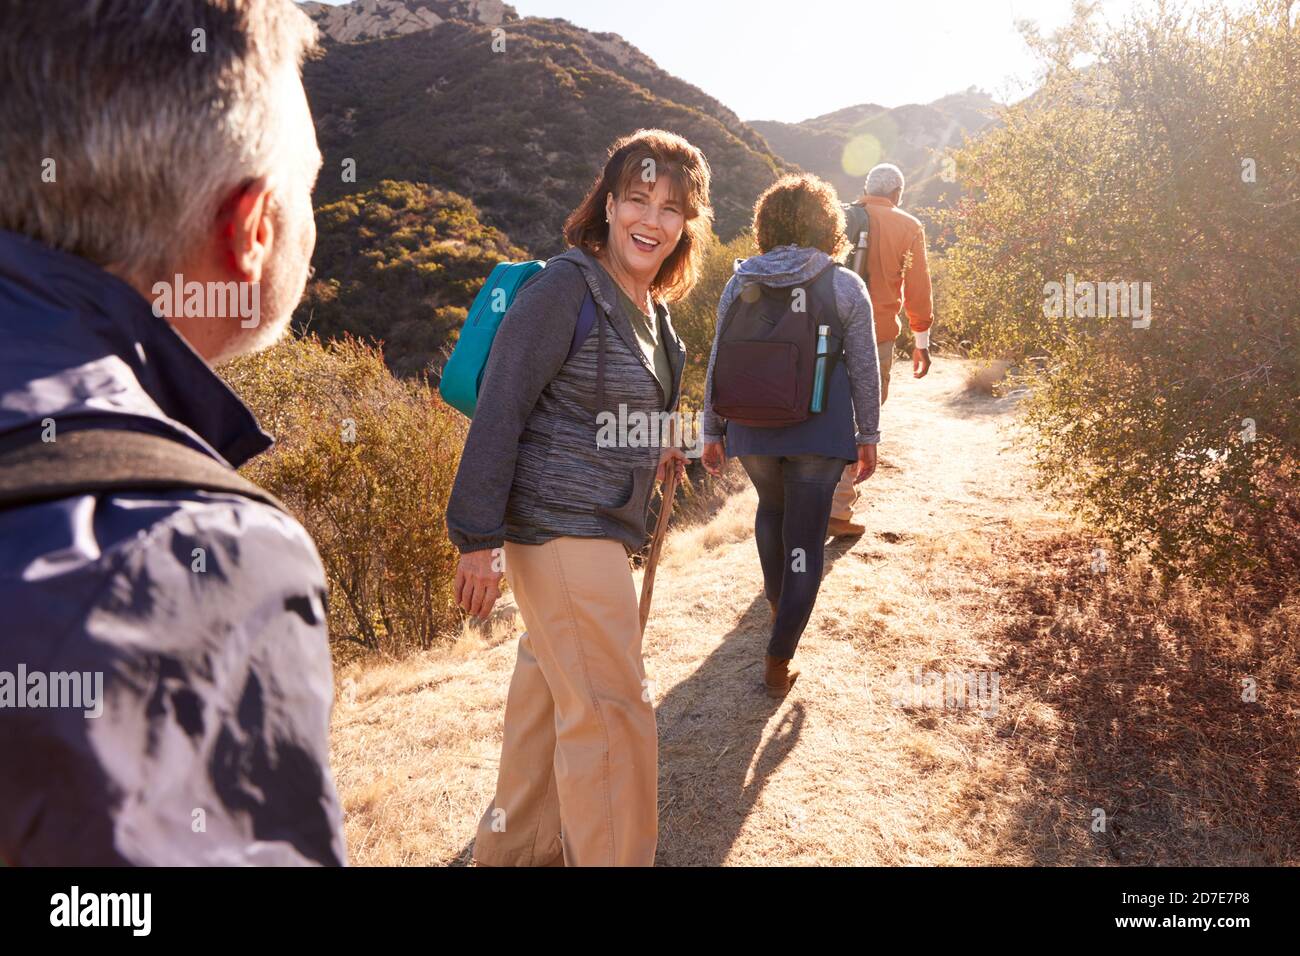 Group Of Senior Friends Go Hiking Along Trail In Countryside Together Stock Photo